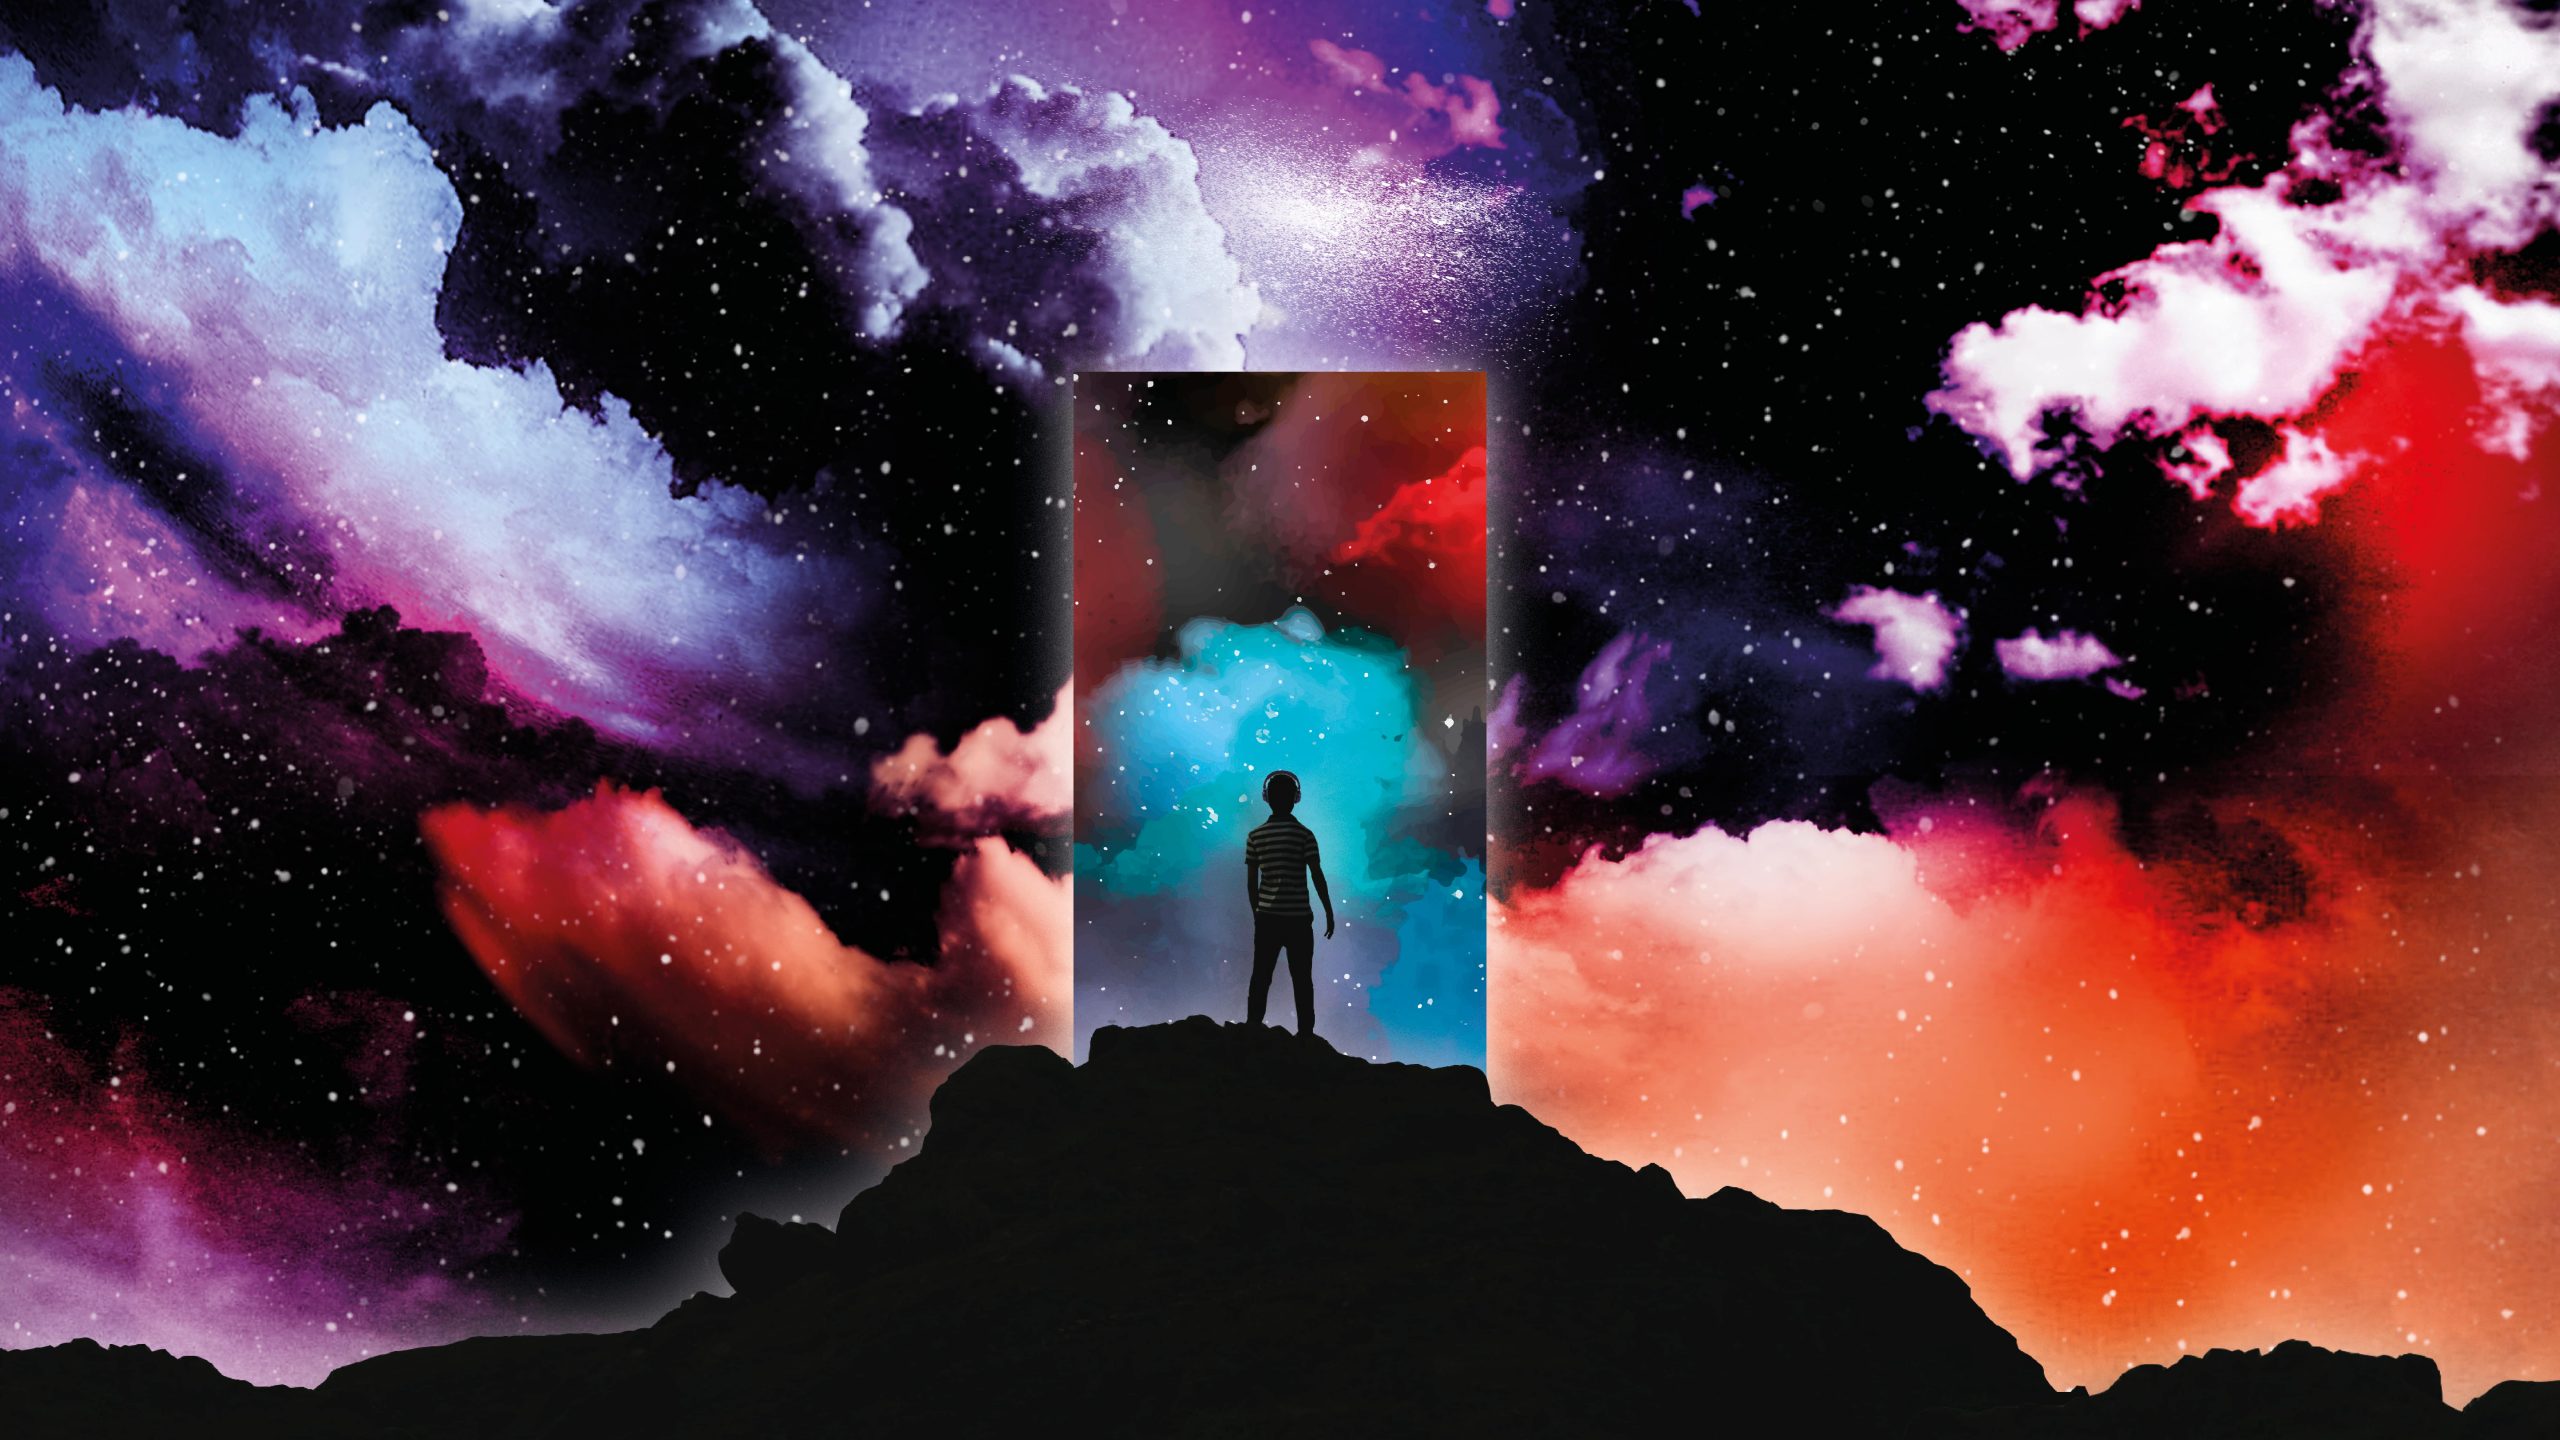 A colourful galaxy clouds backdrop with a large door outlined in the middle and a small figure silhouetted inside it